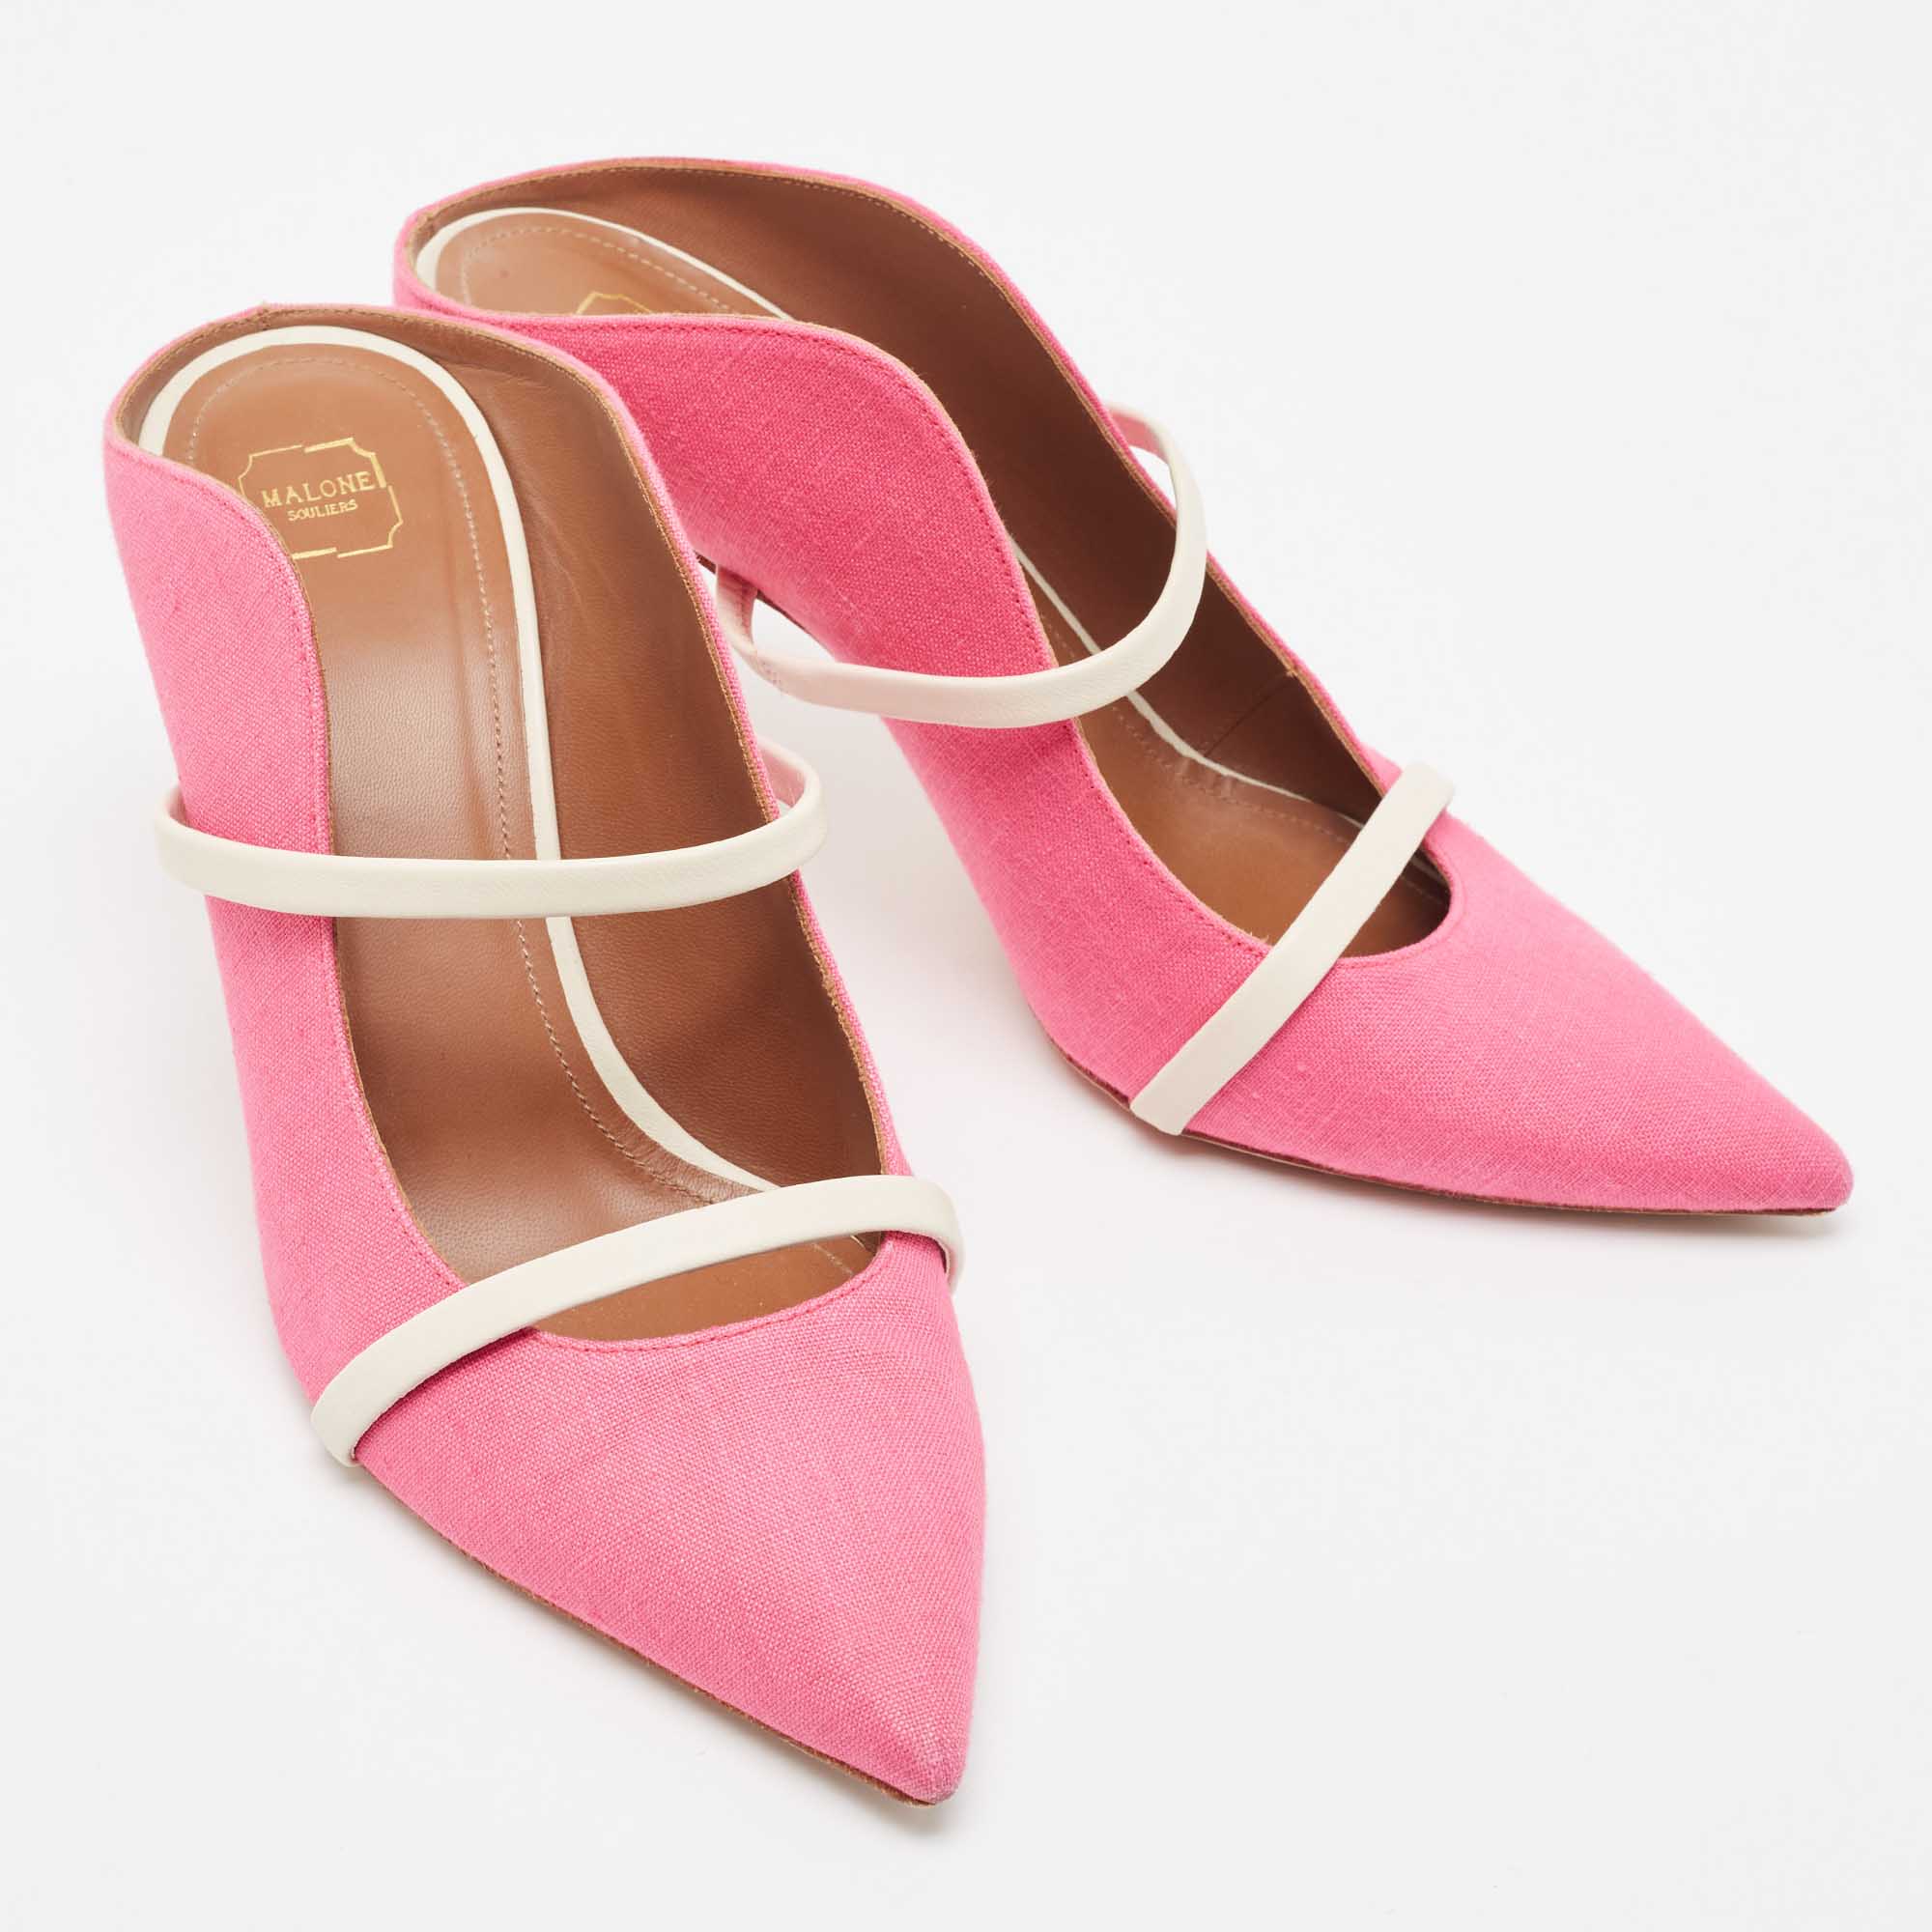 Malone Souliers Pink/White Canvas And Leather Maureen Mules Size 39.5